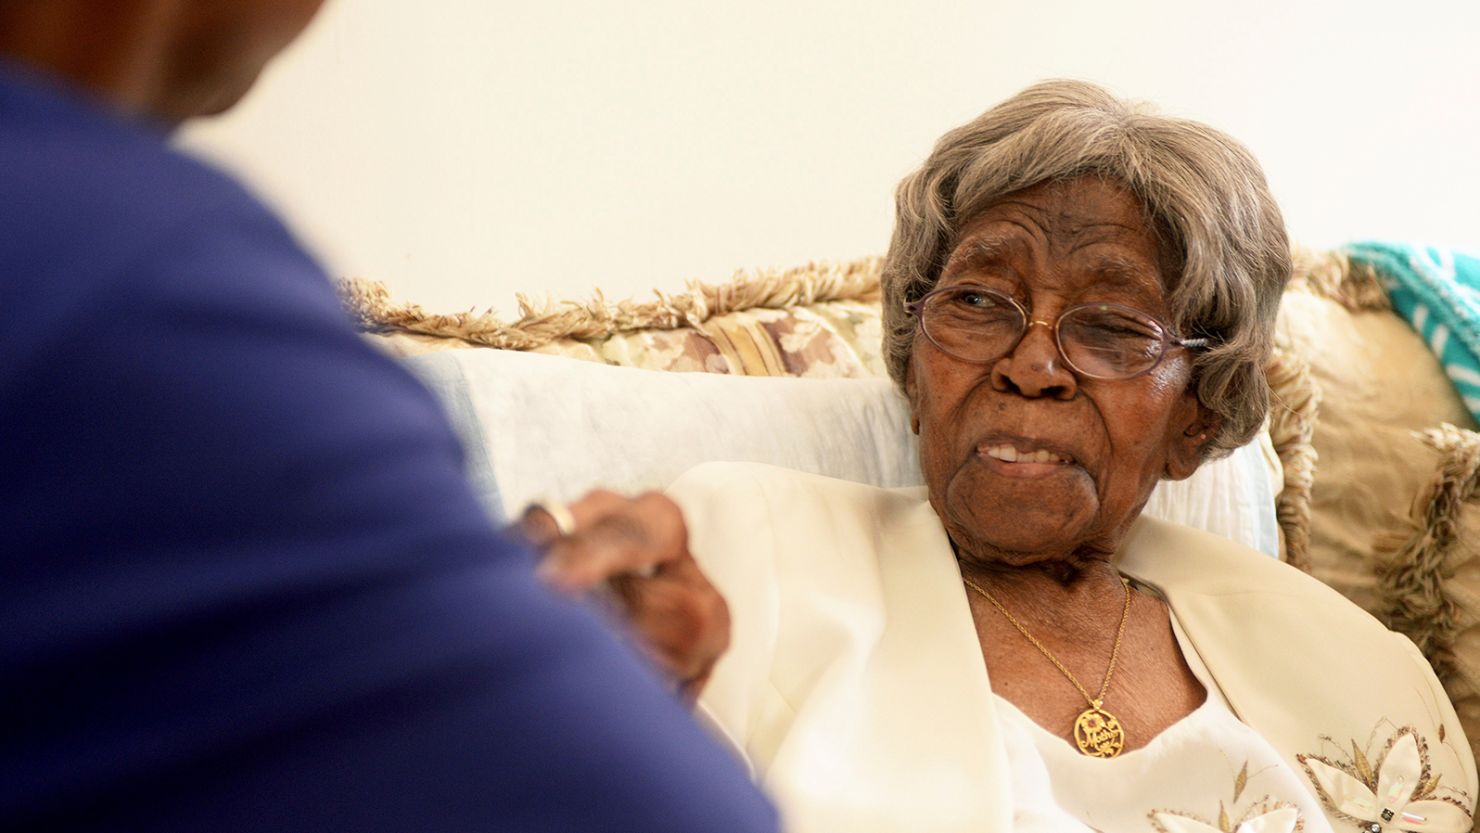 This August 2016 file photo shows Roosevelt Patterson greeting his grandmother Hester "Granny" Ford during Ford's 111th birthday party